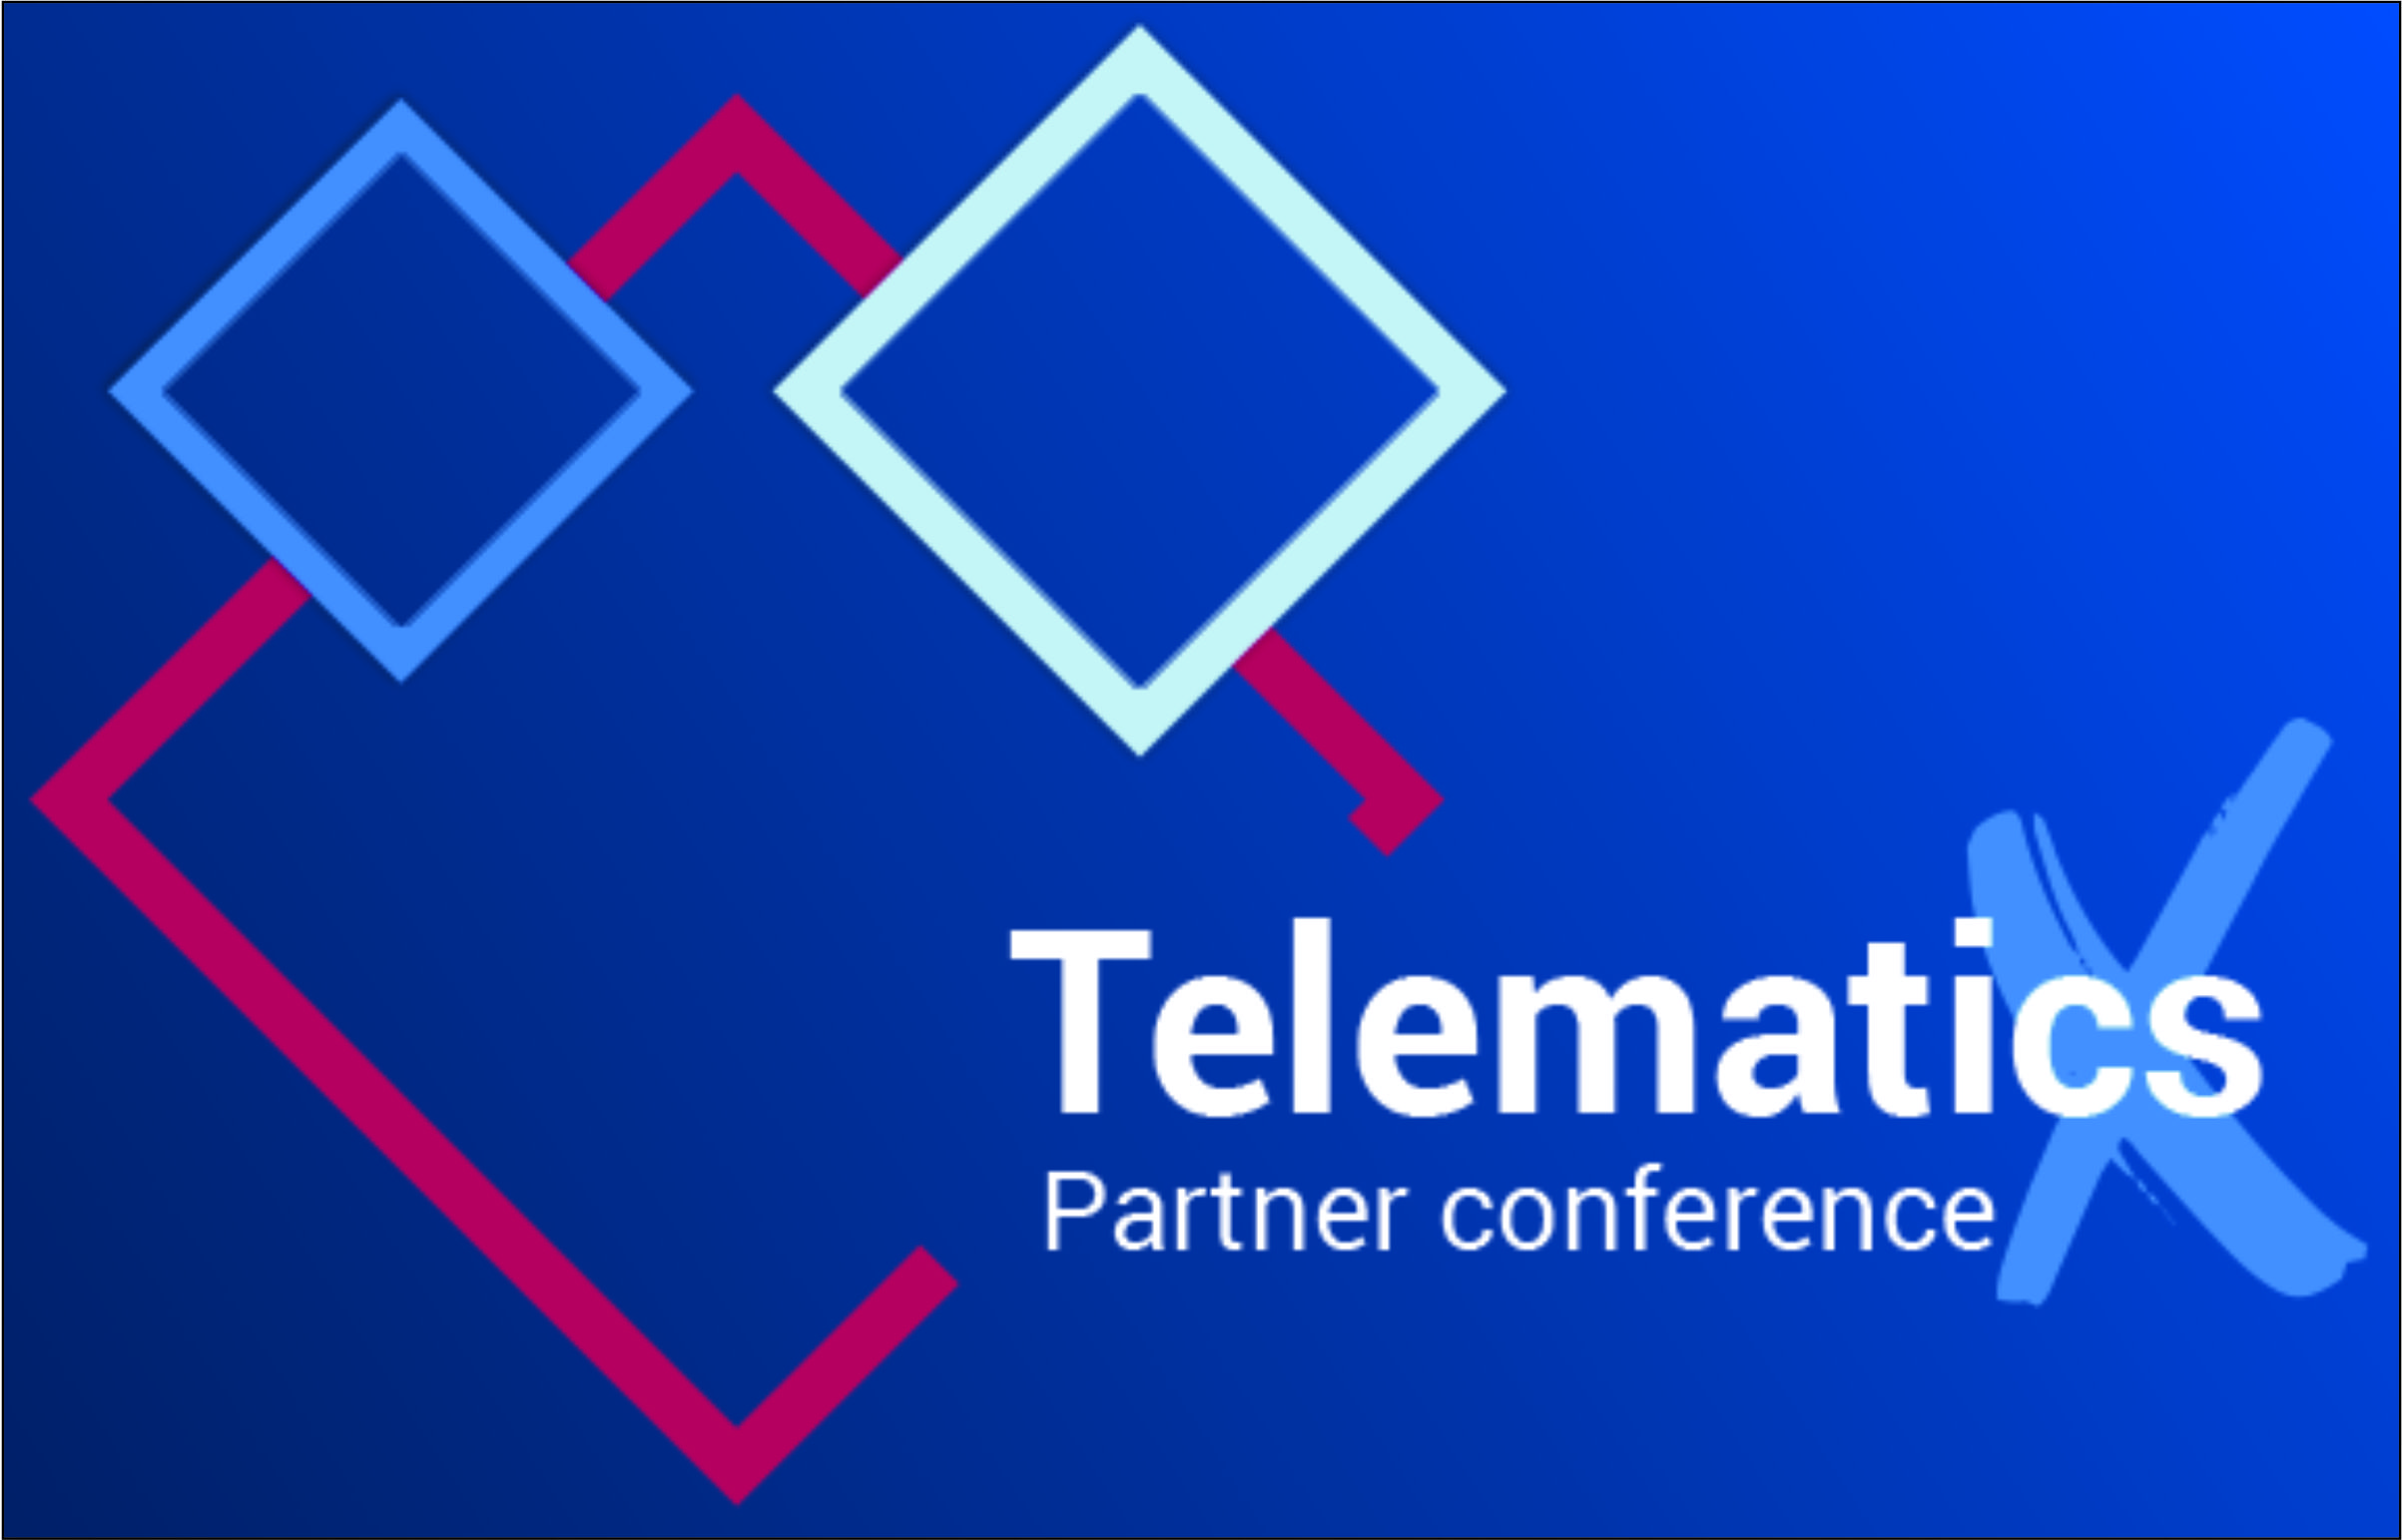 There is one week left before the 10th anniversary TelematiX conference!